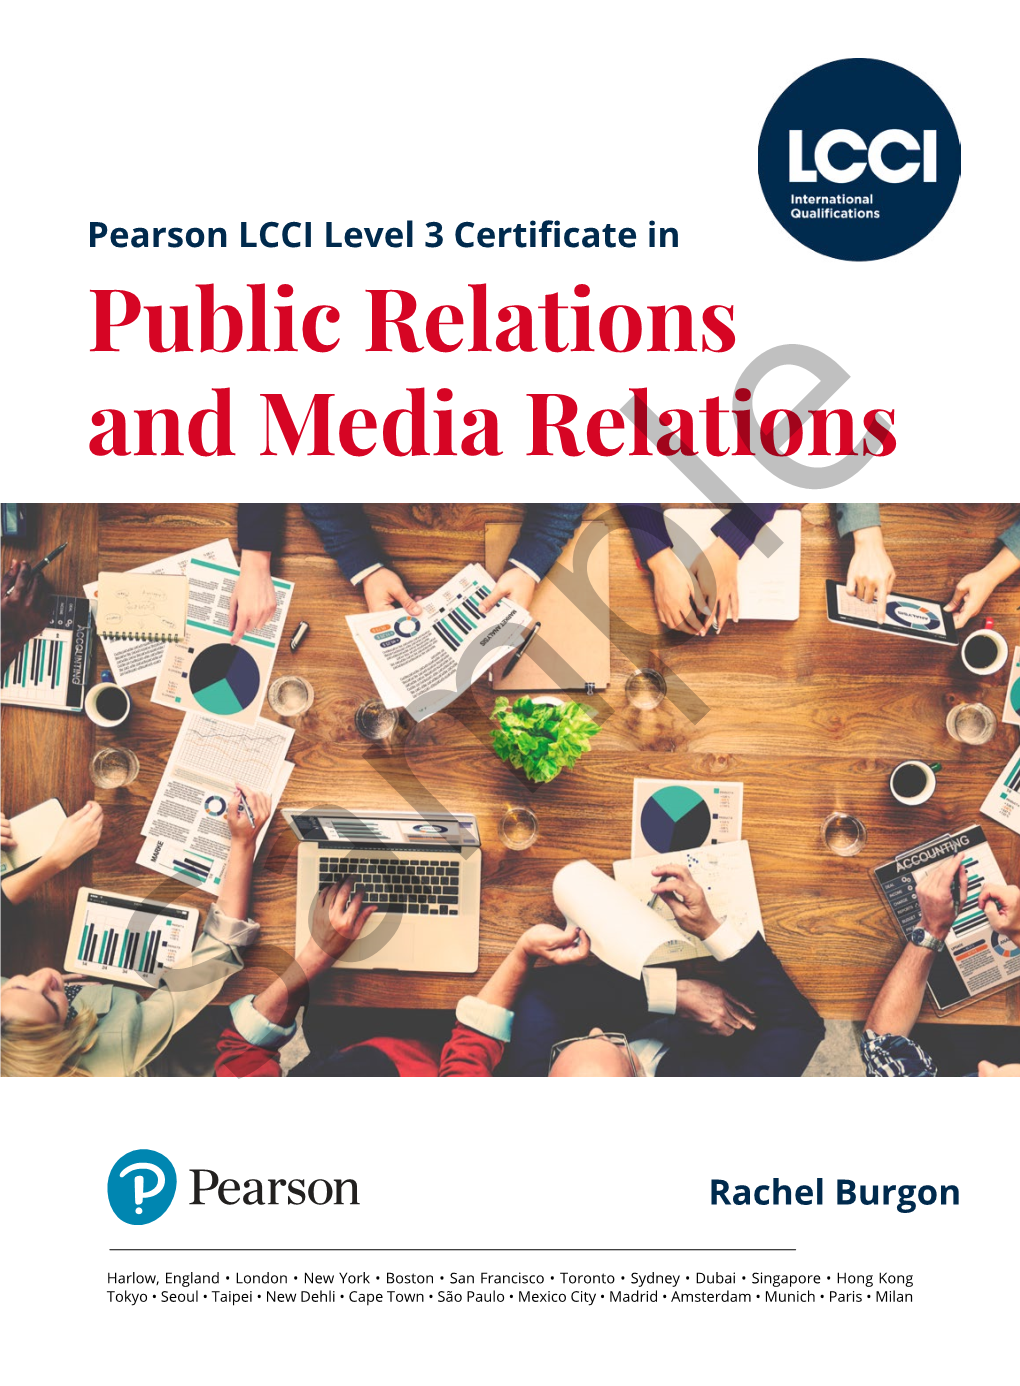 Public Relations and Media Relations